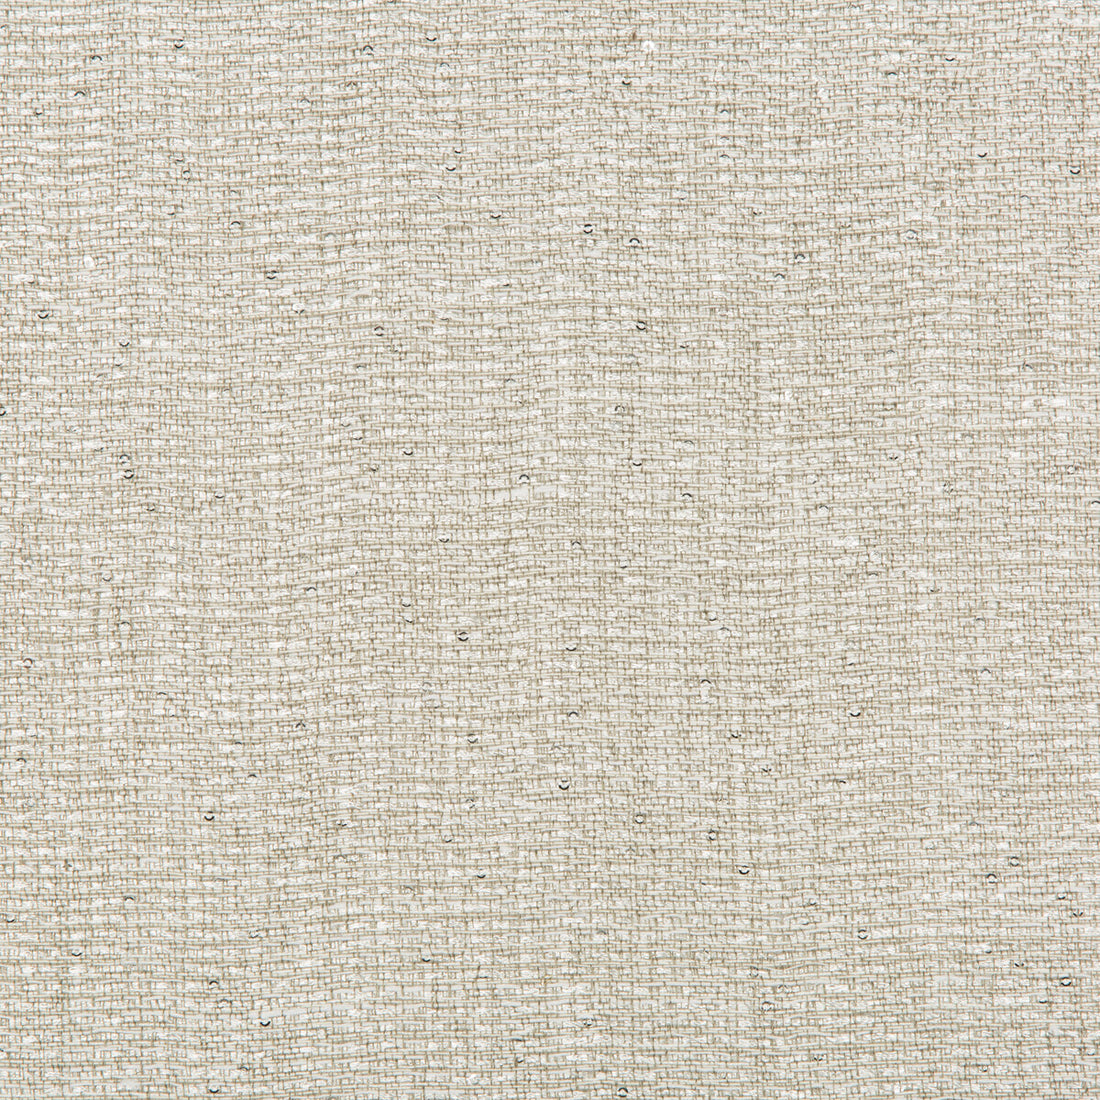 Tinseled fabric in oxide color - pattern 4459.11.0 - by Kravet Couture in the Sue Firestone Malibu collection